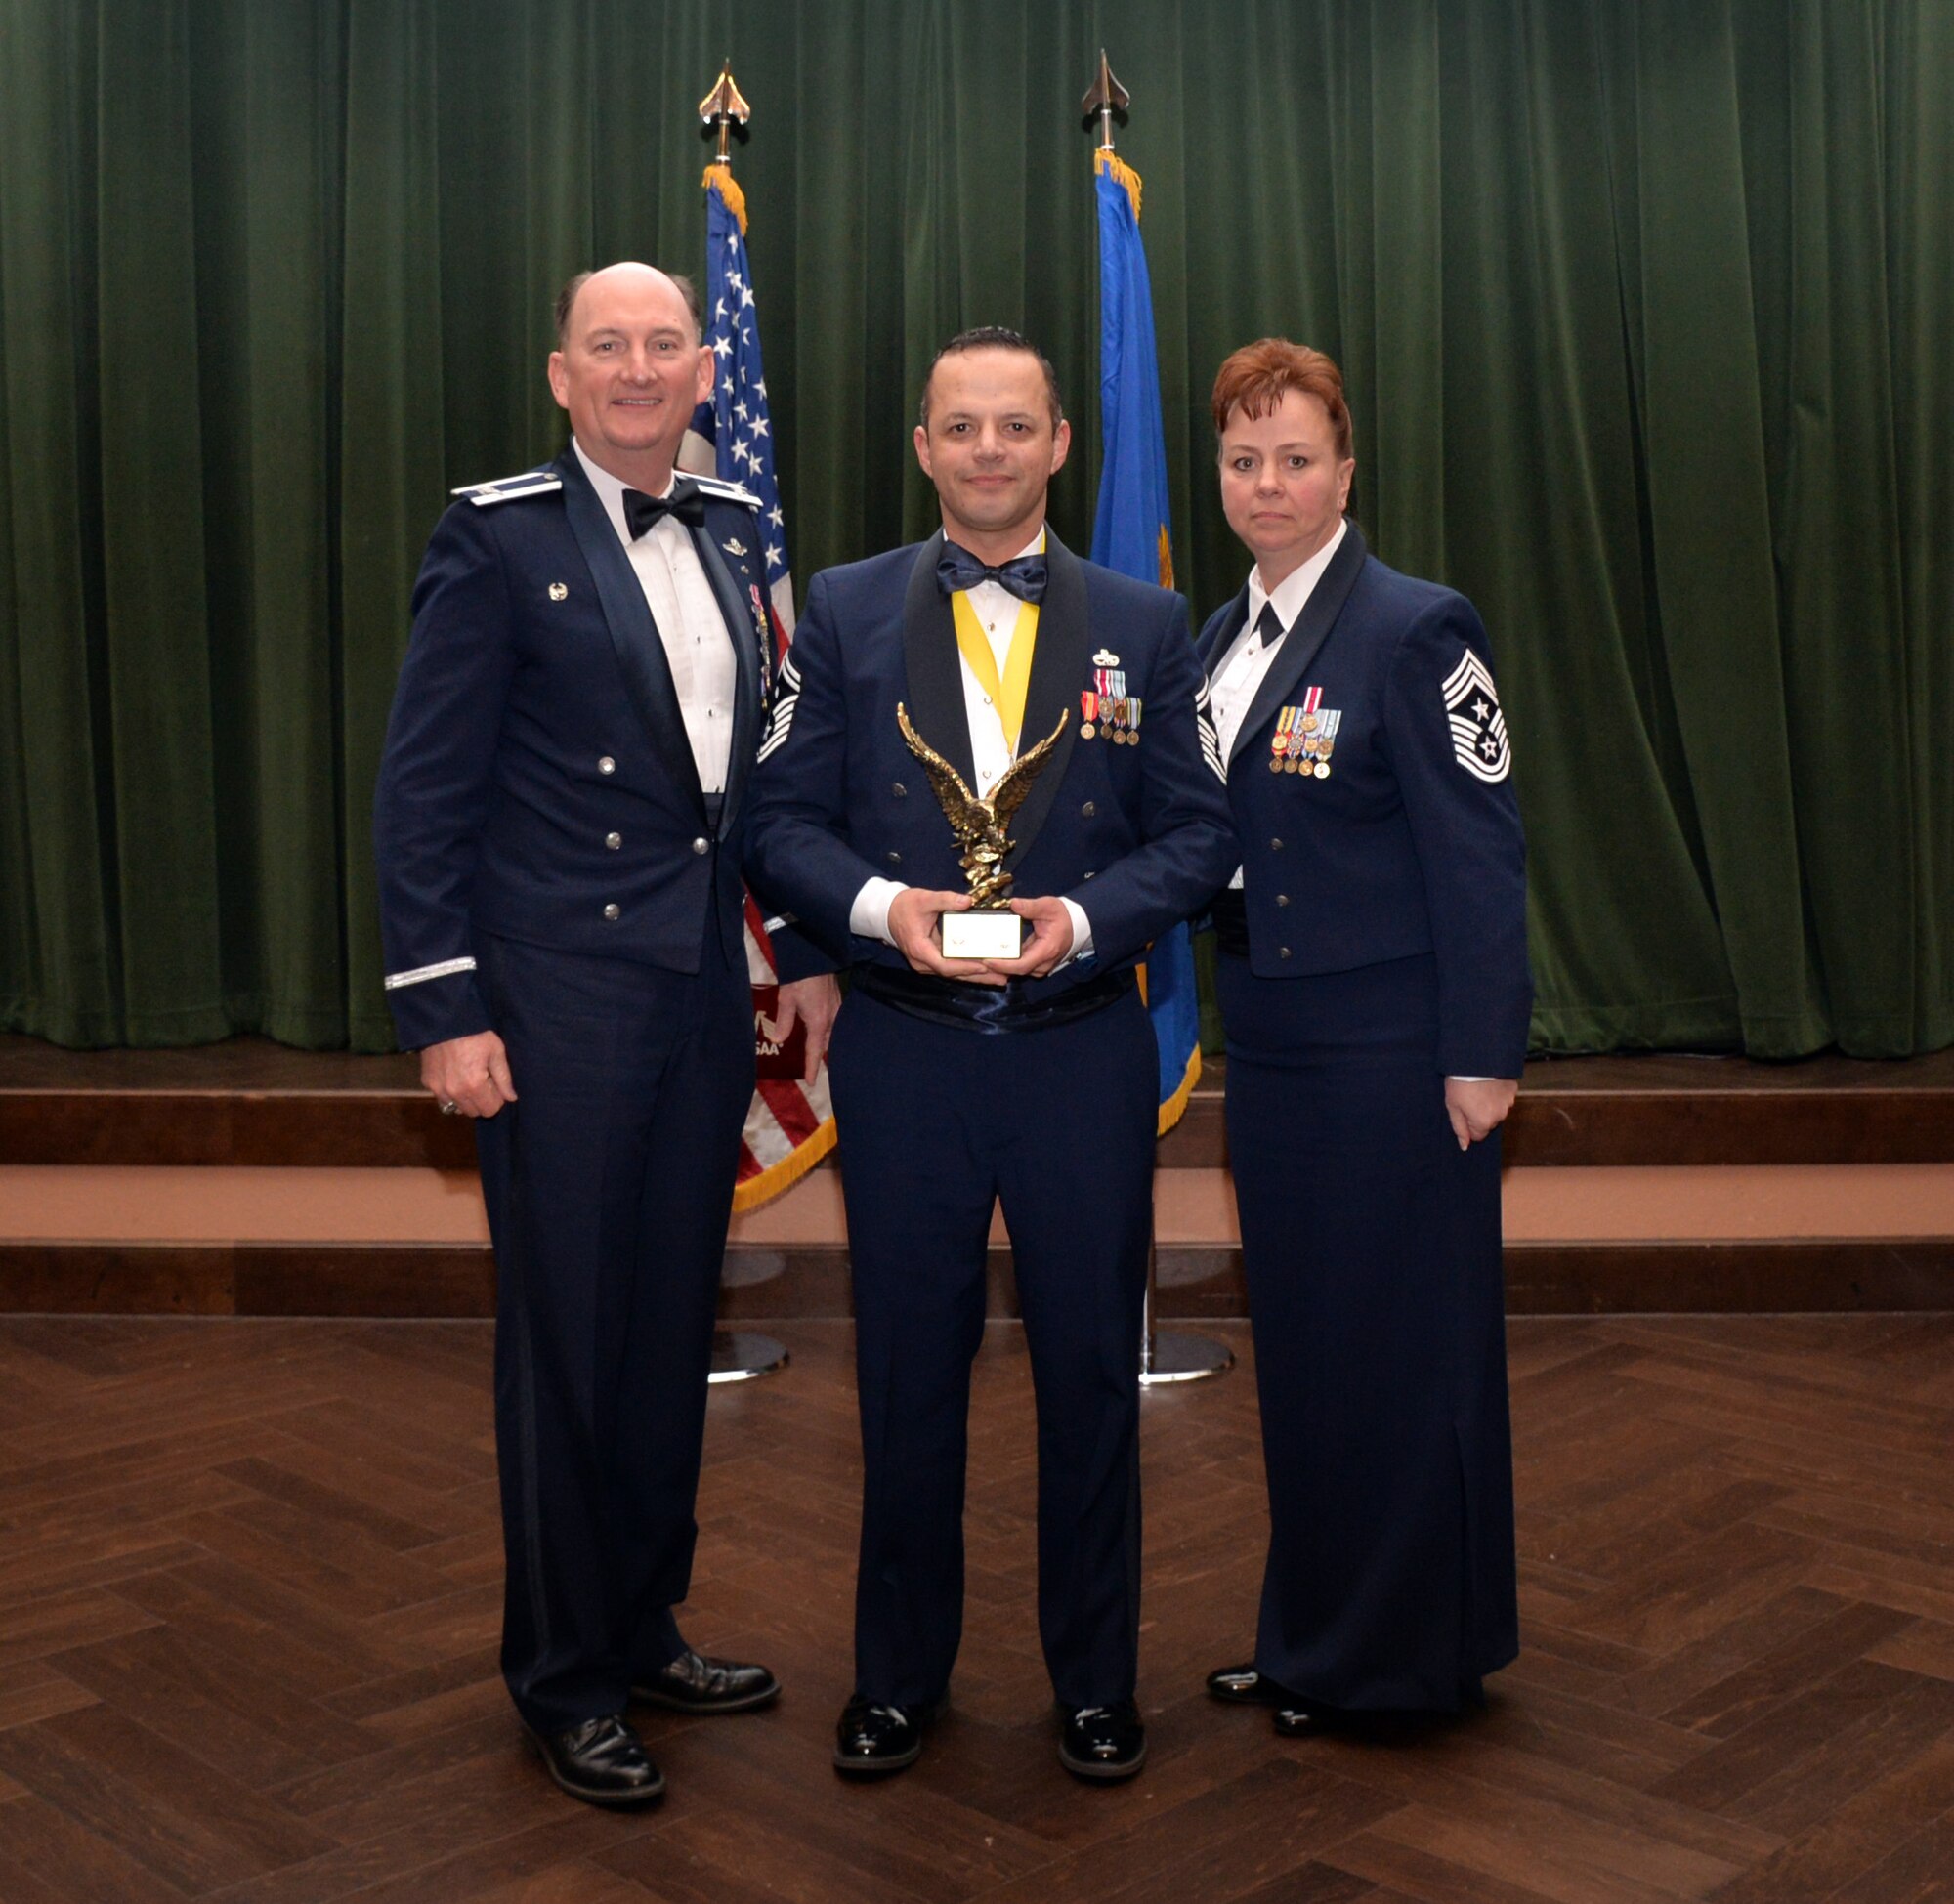 Col. Thomas K. Smith, 433rd Airlift Wing commander, and 433rd AW Command Chief Master Sgt. Shana C. Cullum, award Senior Master Sgt. Arturo Loya, 74th Aerial Port Squadron, as the First Sergeant of the Year at the 433rd AW annual awards banquet at Joint Base San Antonio-Lackland, Texas Feb. 9, 2019.